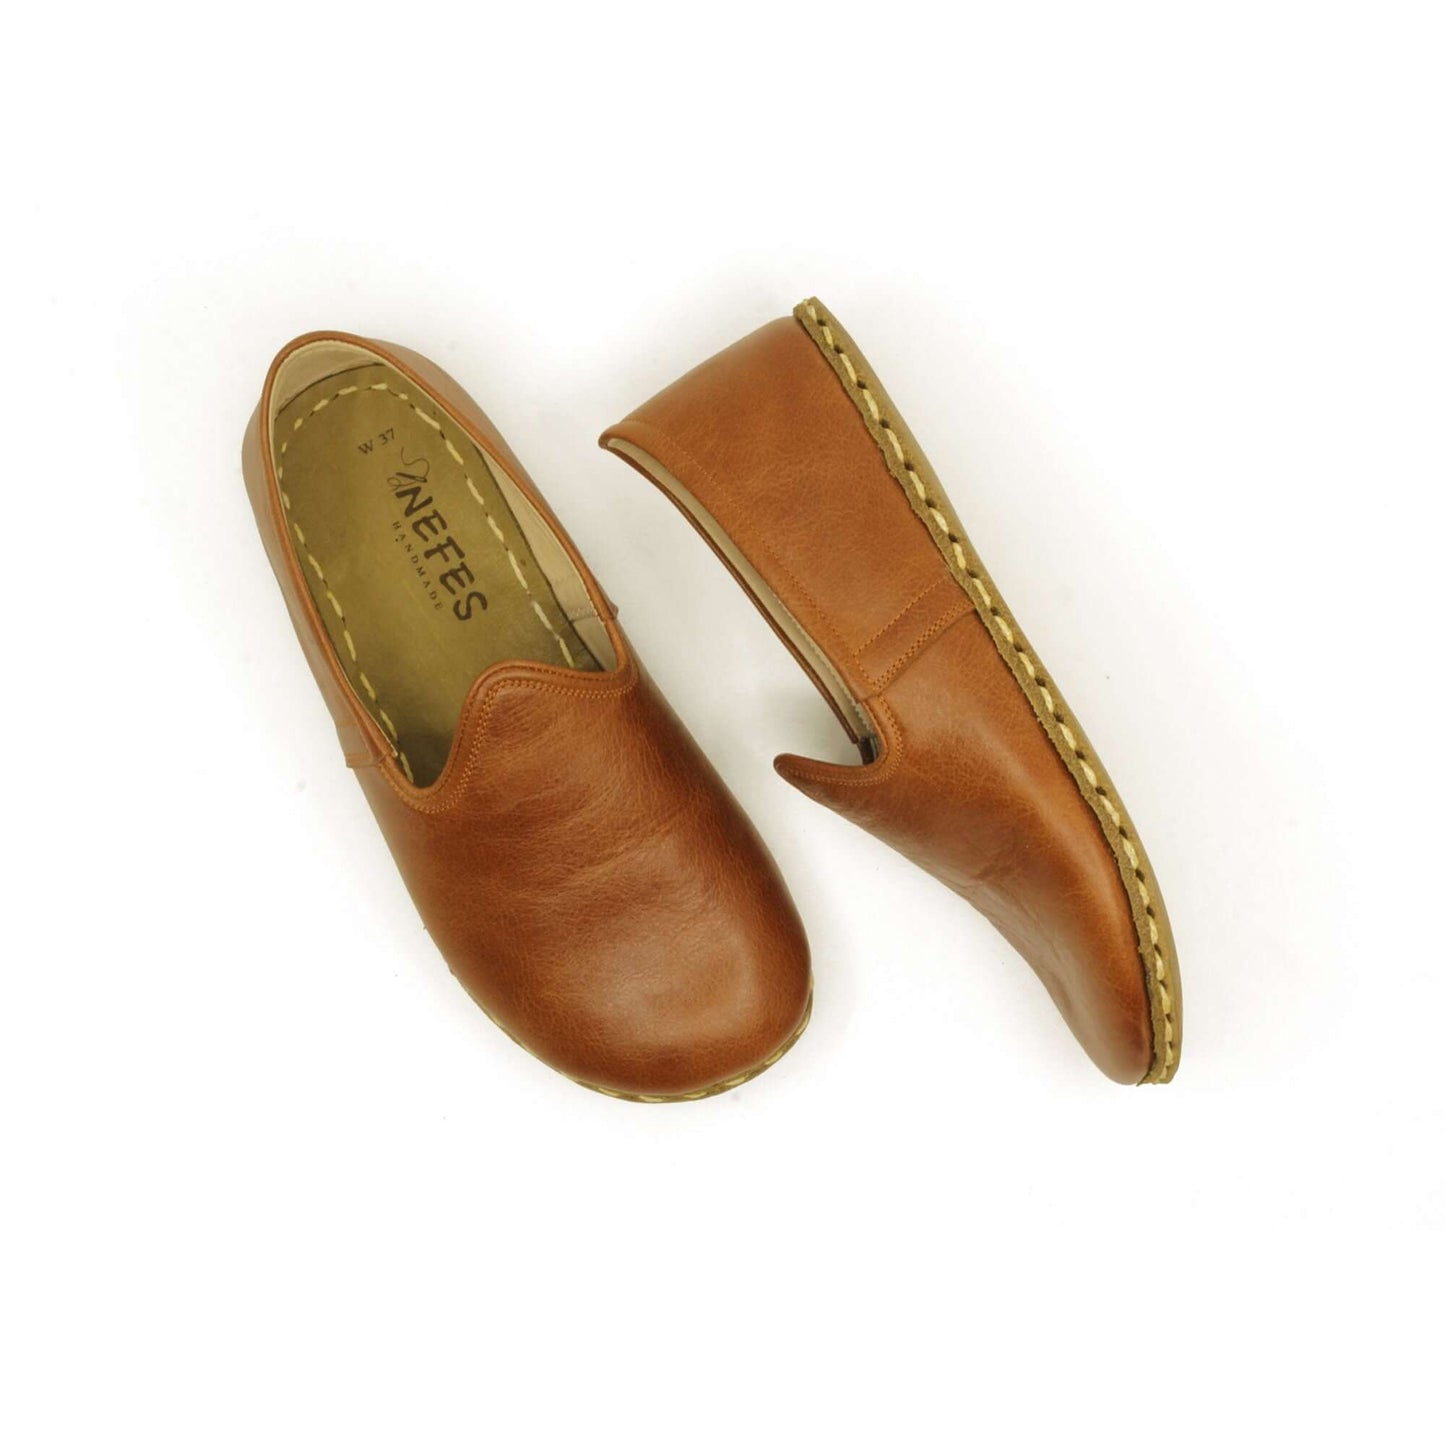 Antique Brown Leather Barefoot Loafers for Men | Handmade Slip-On Shoes with Wide Toe Box